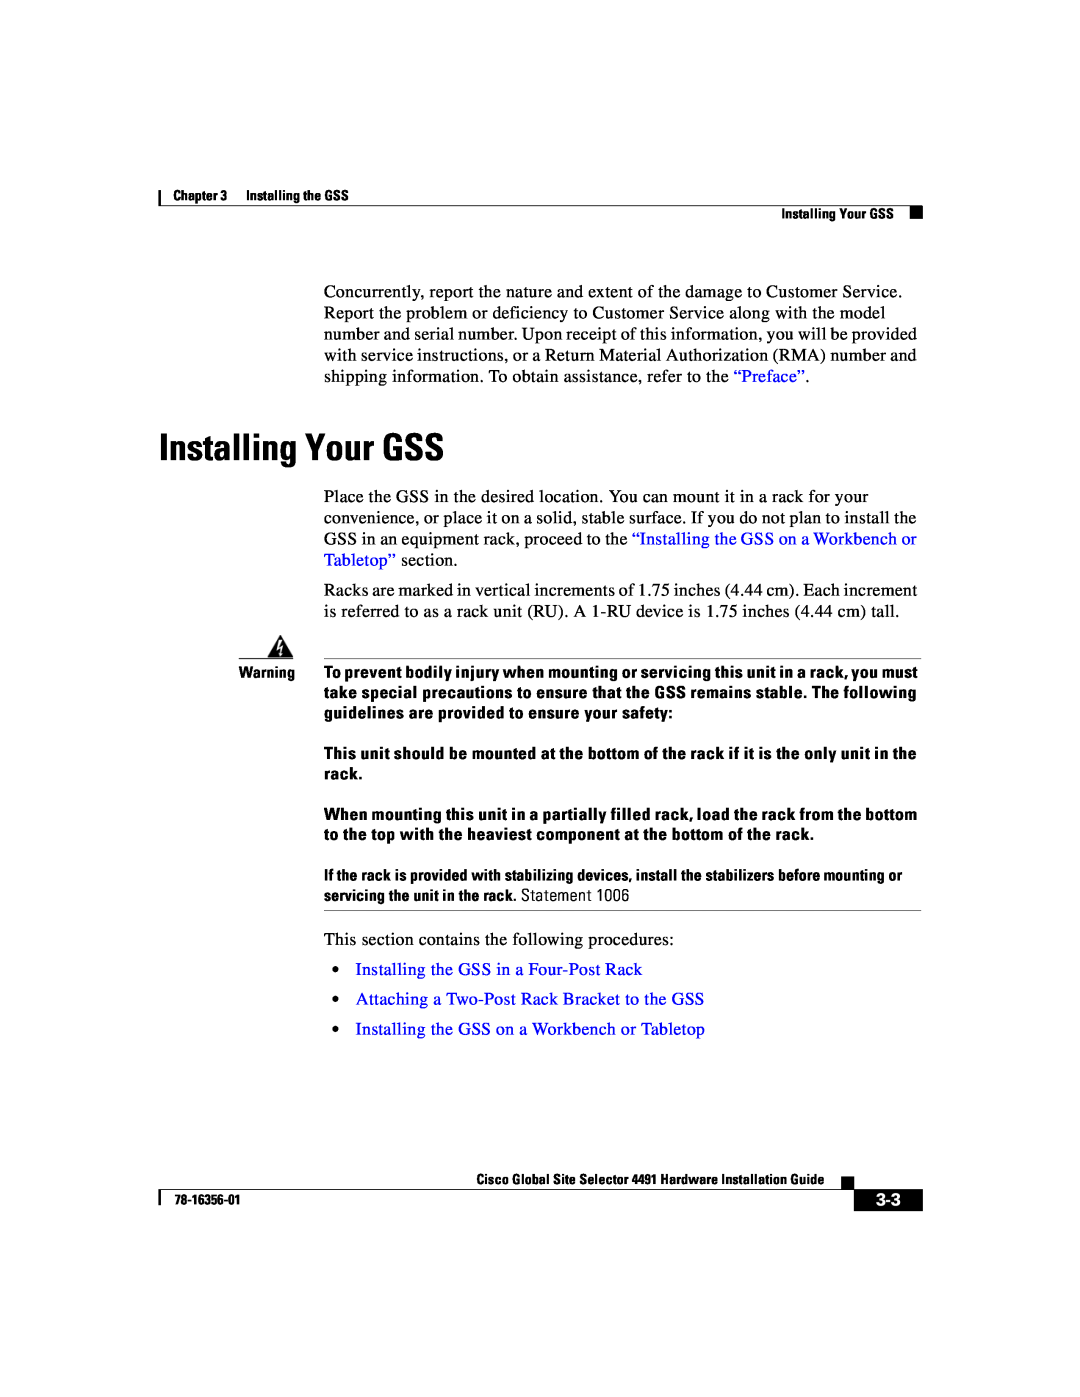 Cisco Systems 78-16356-01 manual Installing Your GSS, Installing the GSS in a Four-Post Rack 